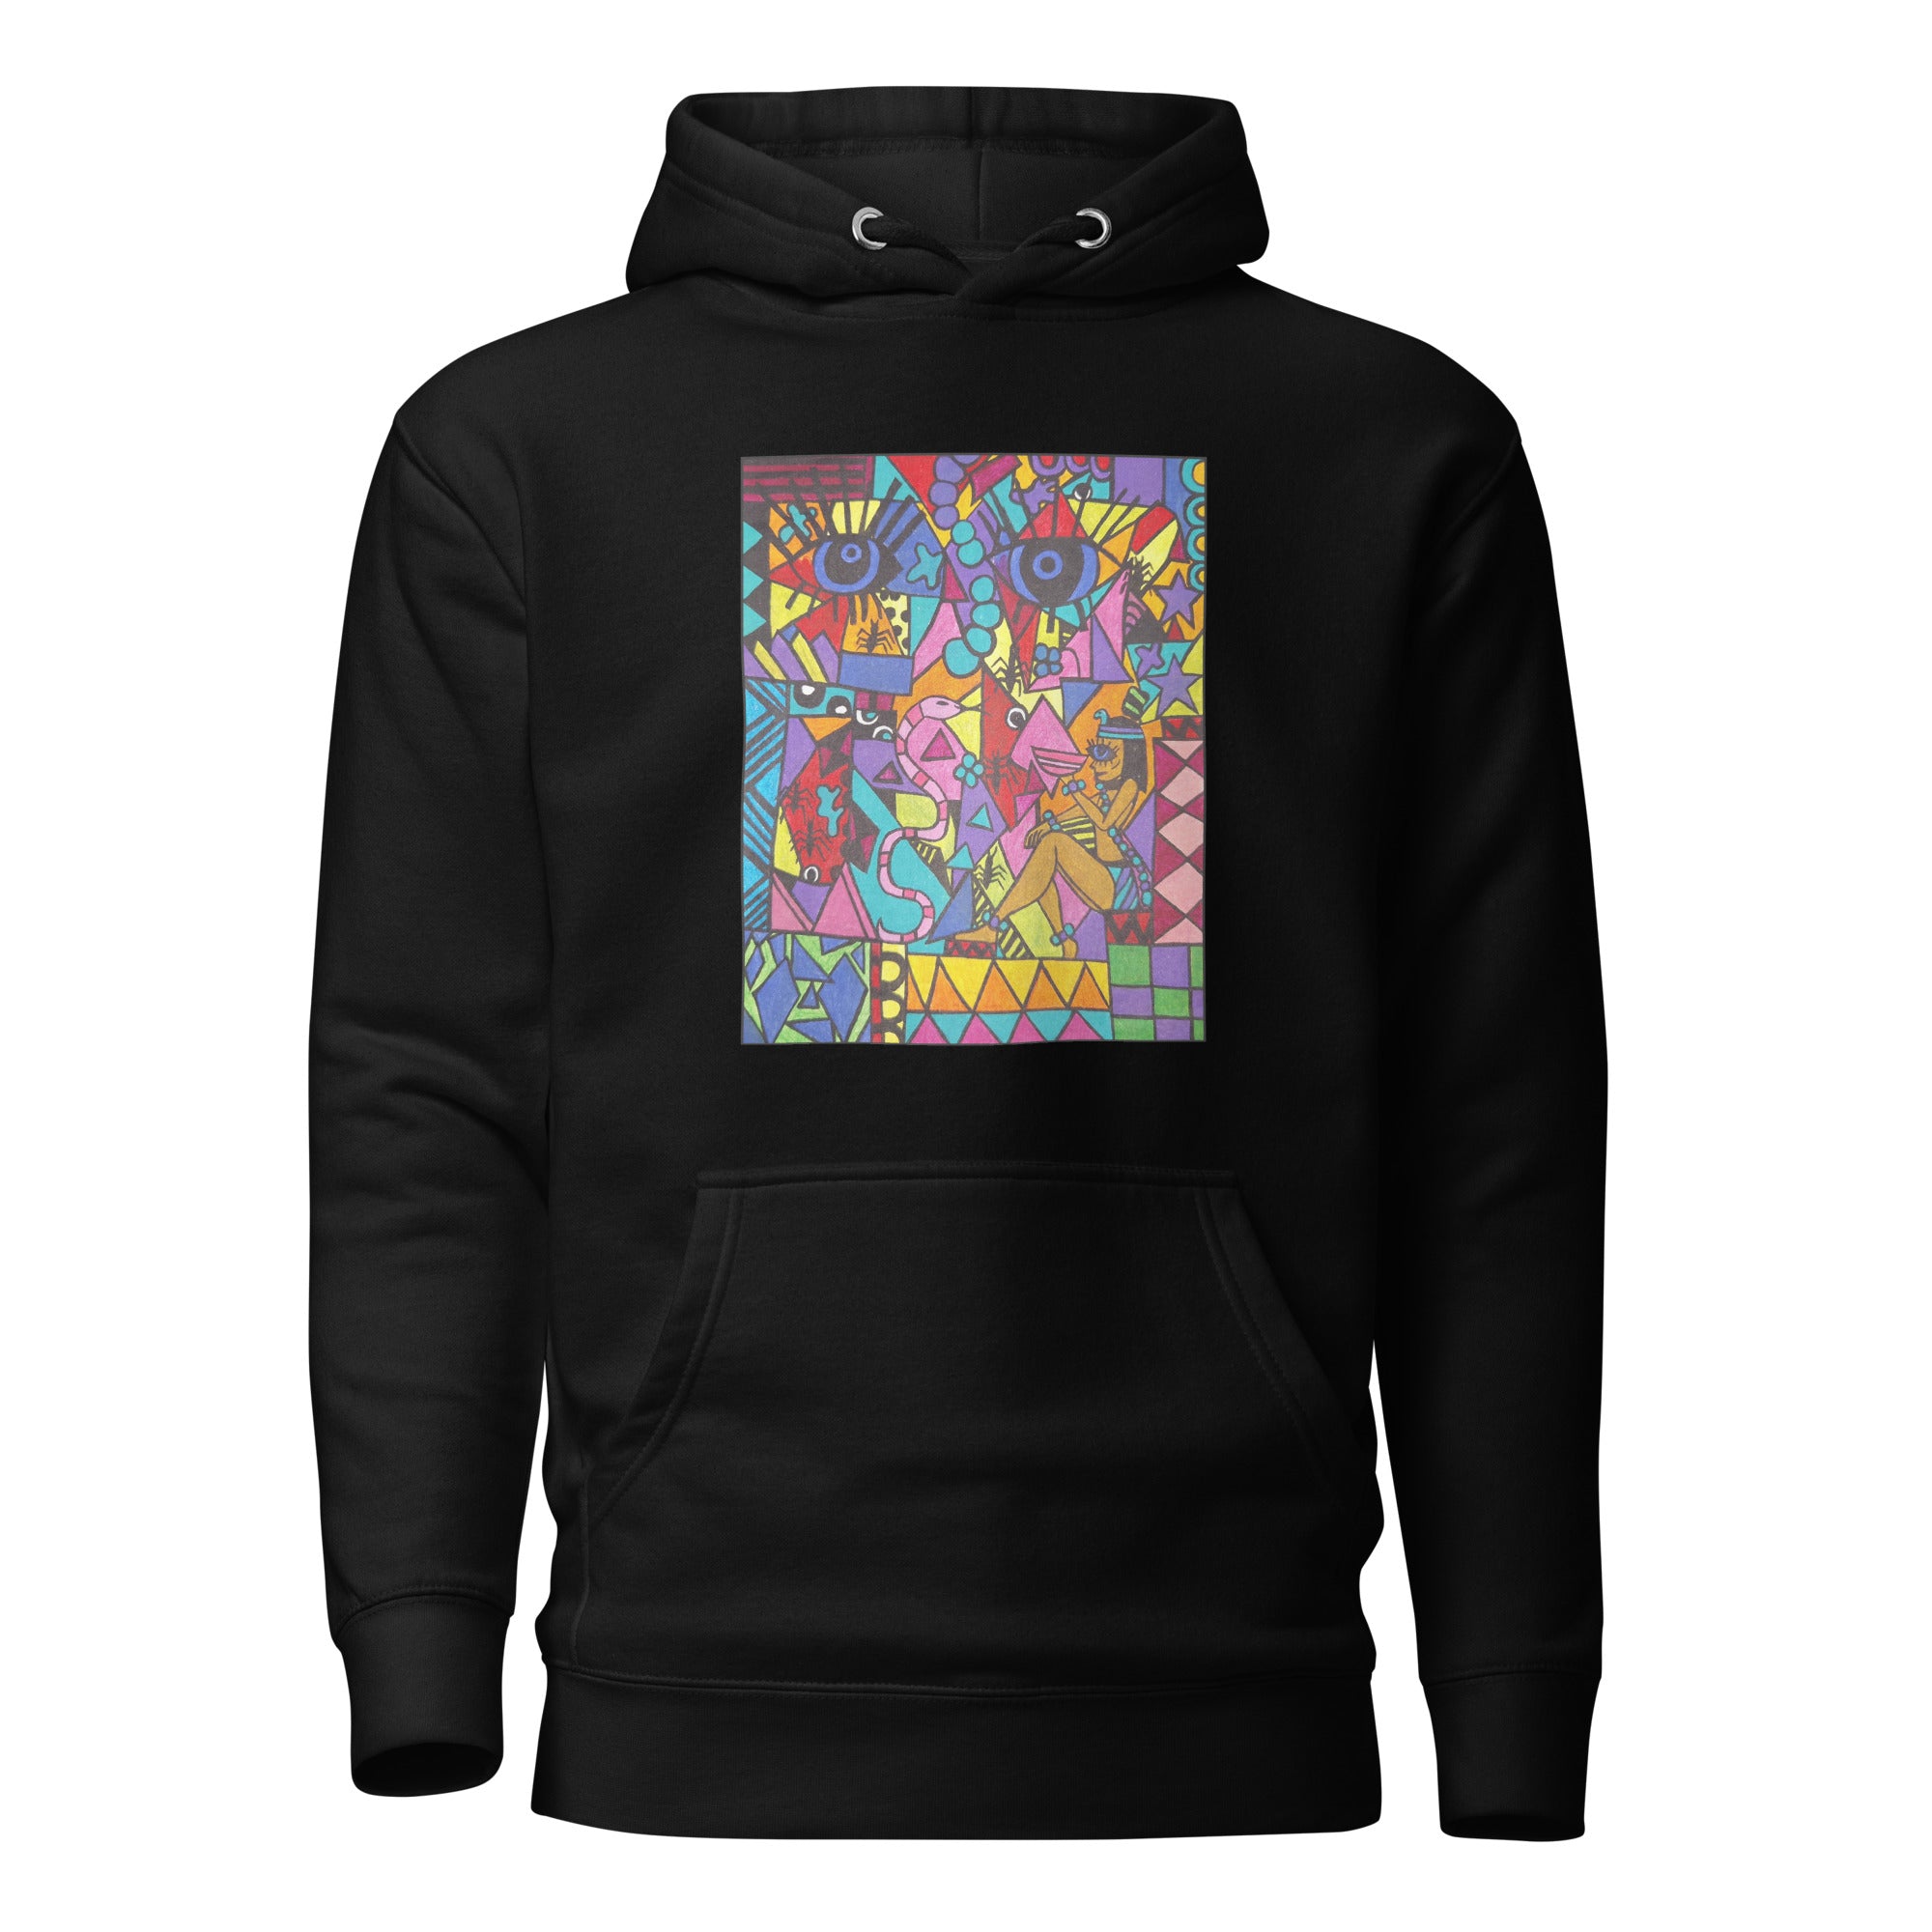 Hoodie - Unisex - SUPPORT A CHARITY - Art from South Africa SA01 (Hoodie en plusieurs couleurs)